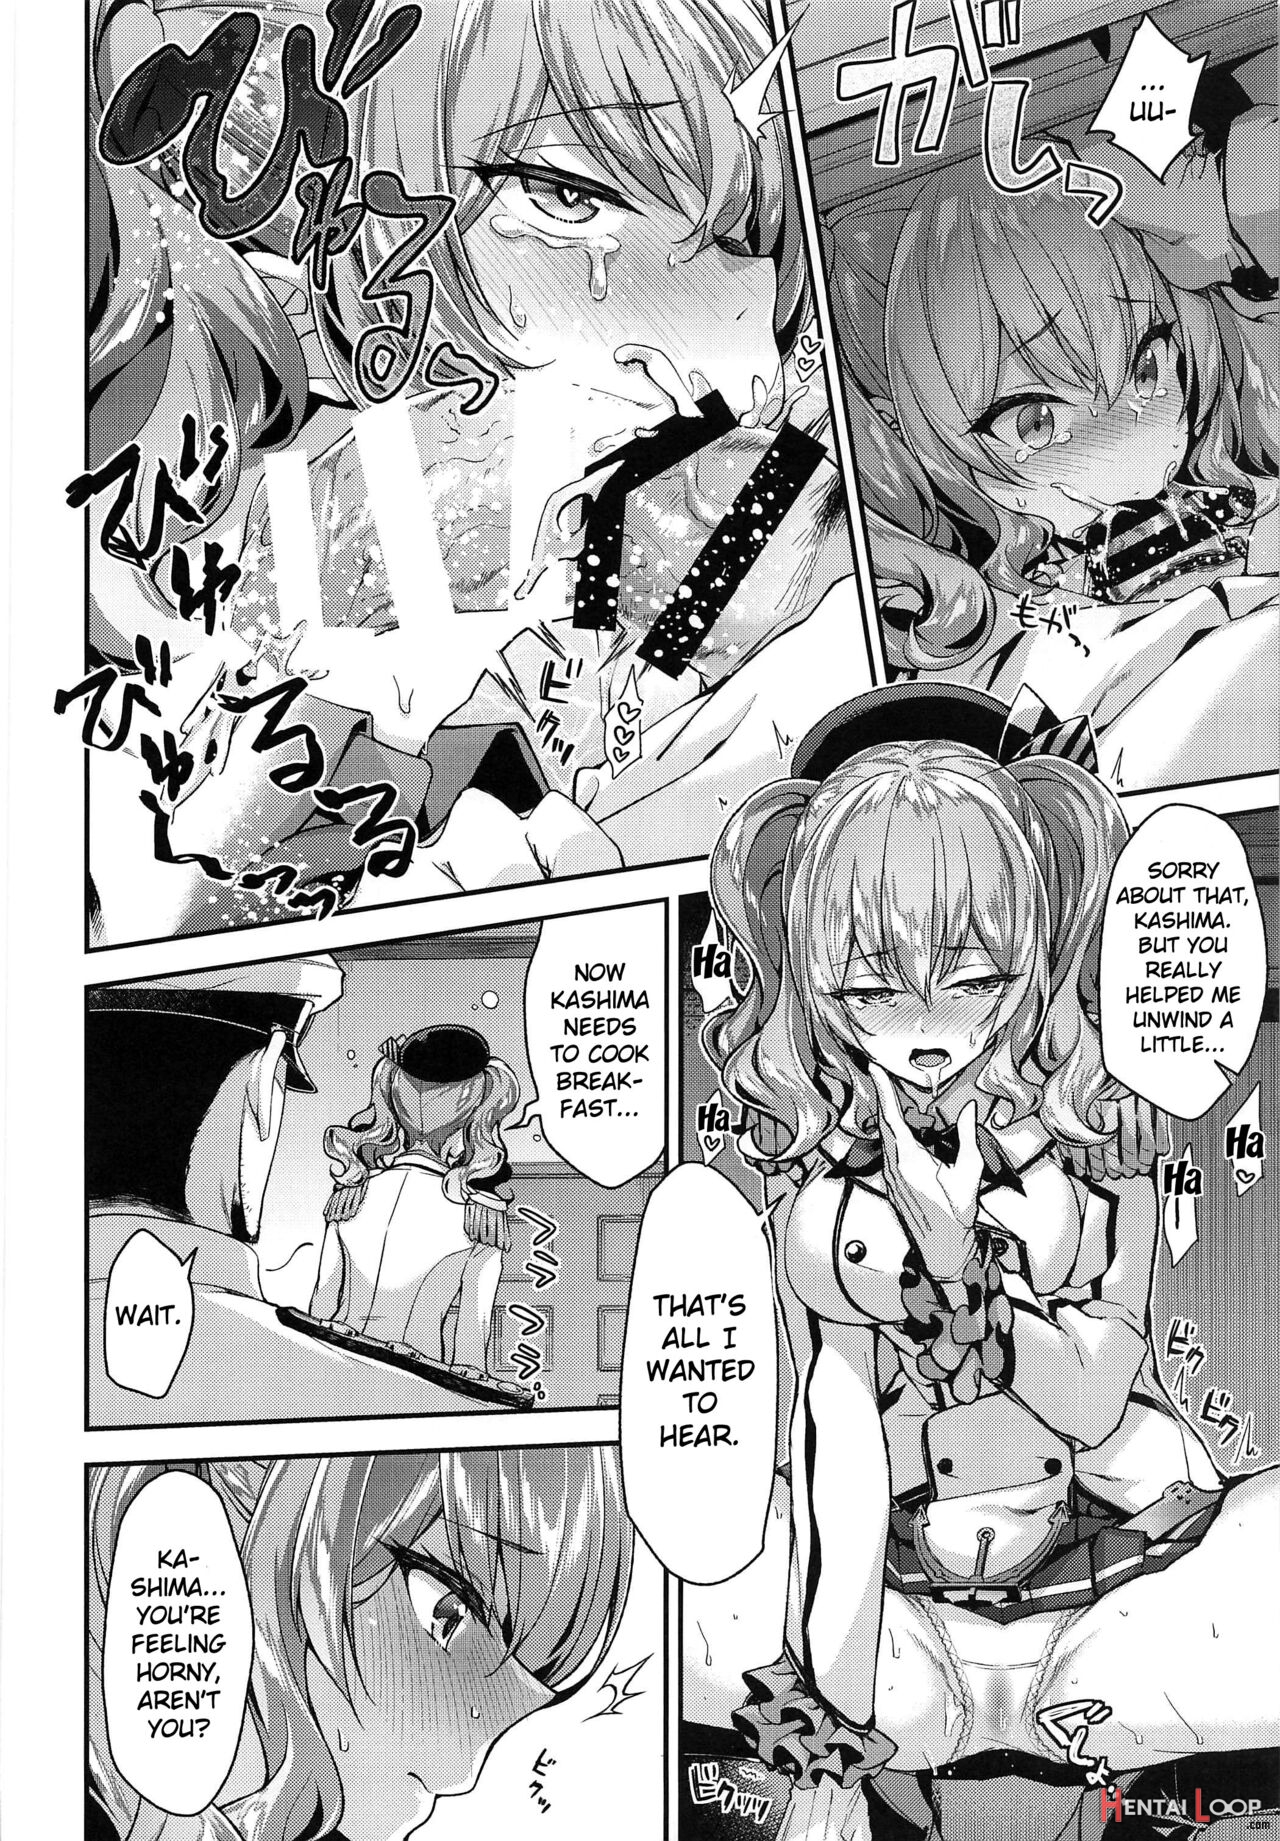 Having A Lovey Dovey Sex Life At The Navy Base Together With Kashima page 6